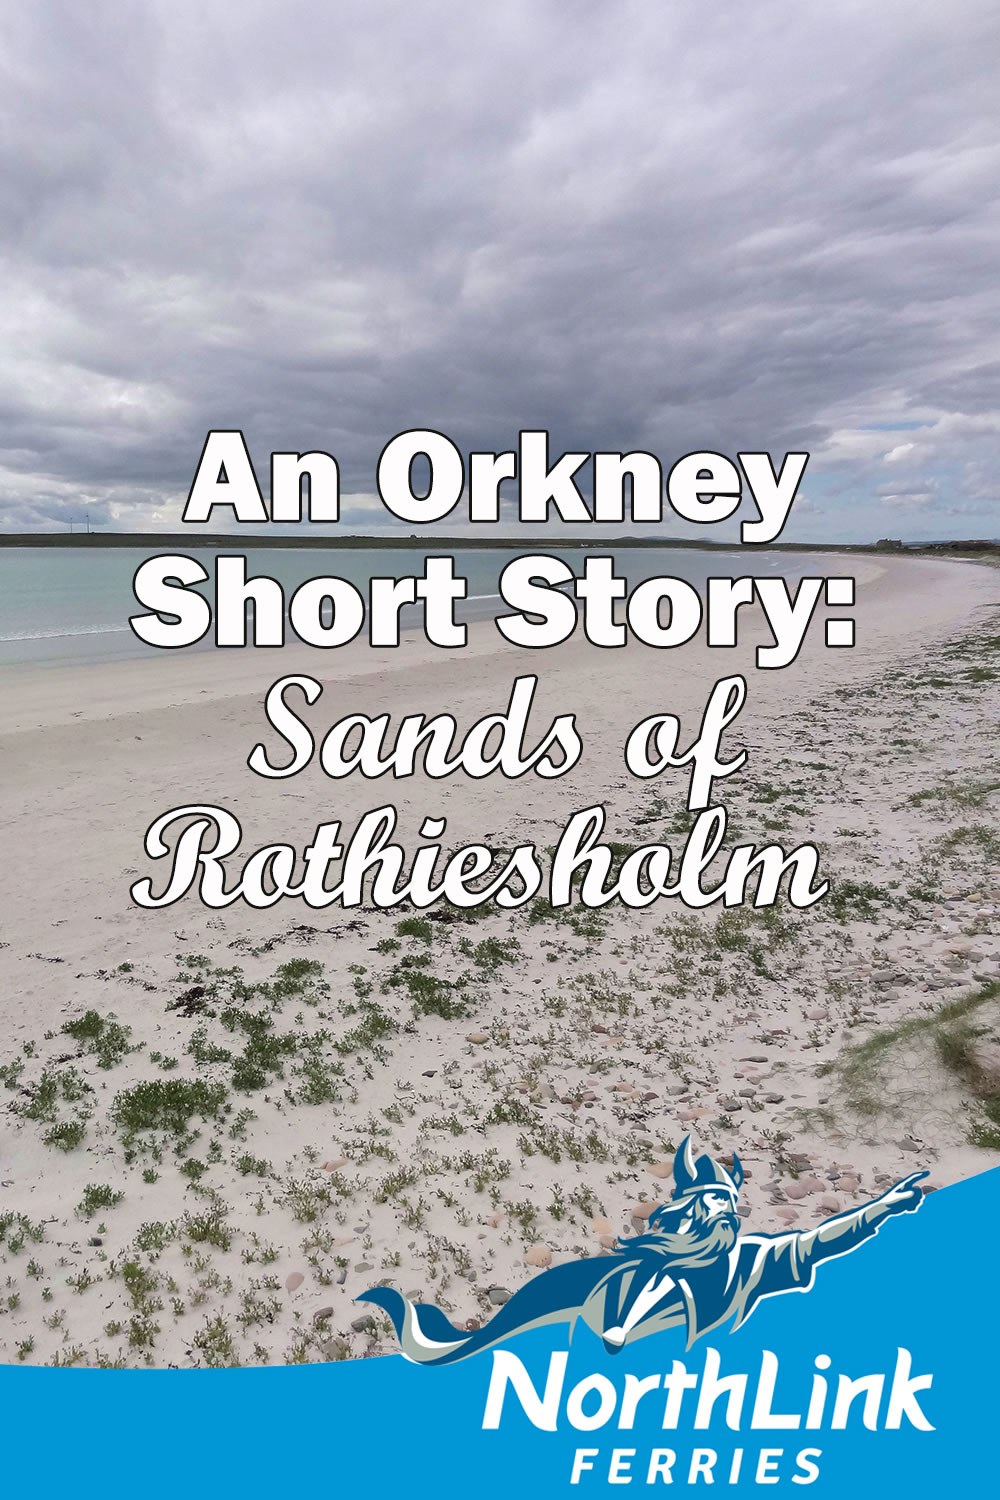 An Orkney Short Story: Sands of Rothiesholm